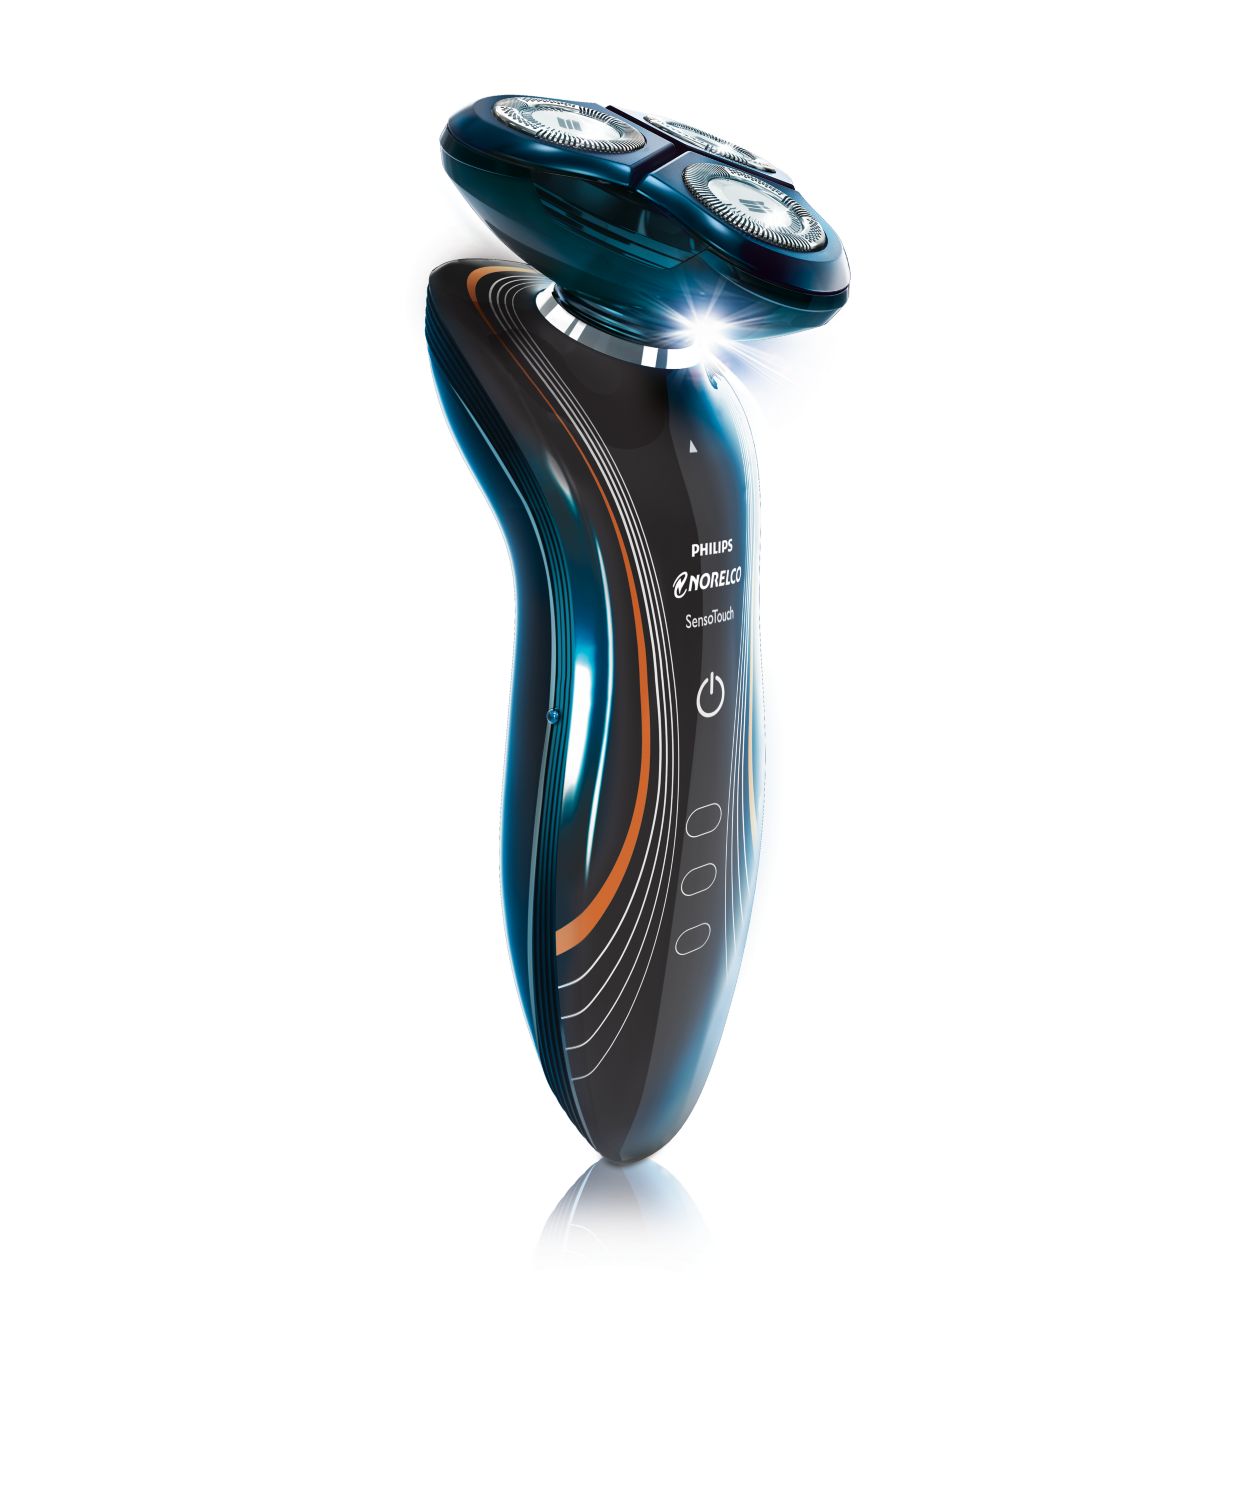 Philips Norelco Electric Shaver 3100 Review